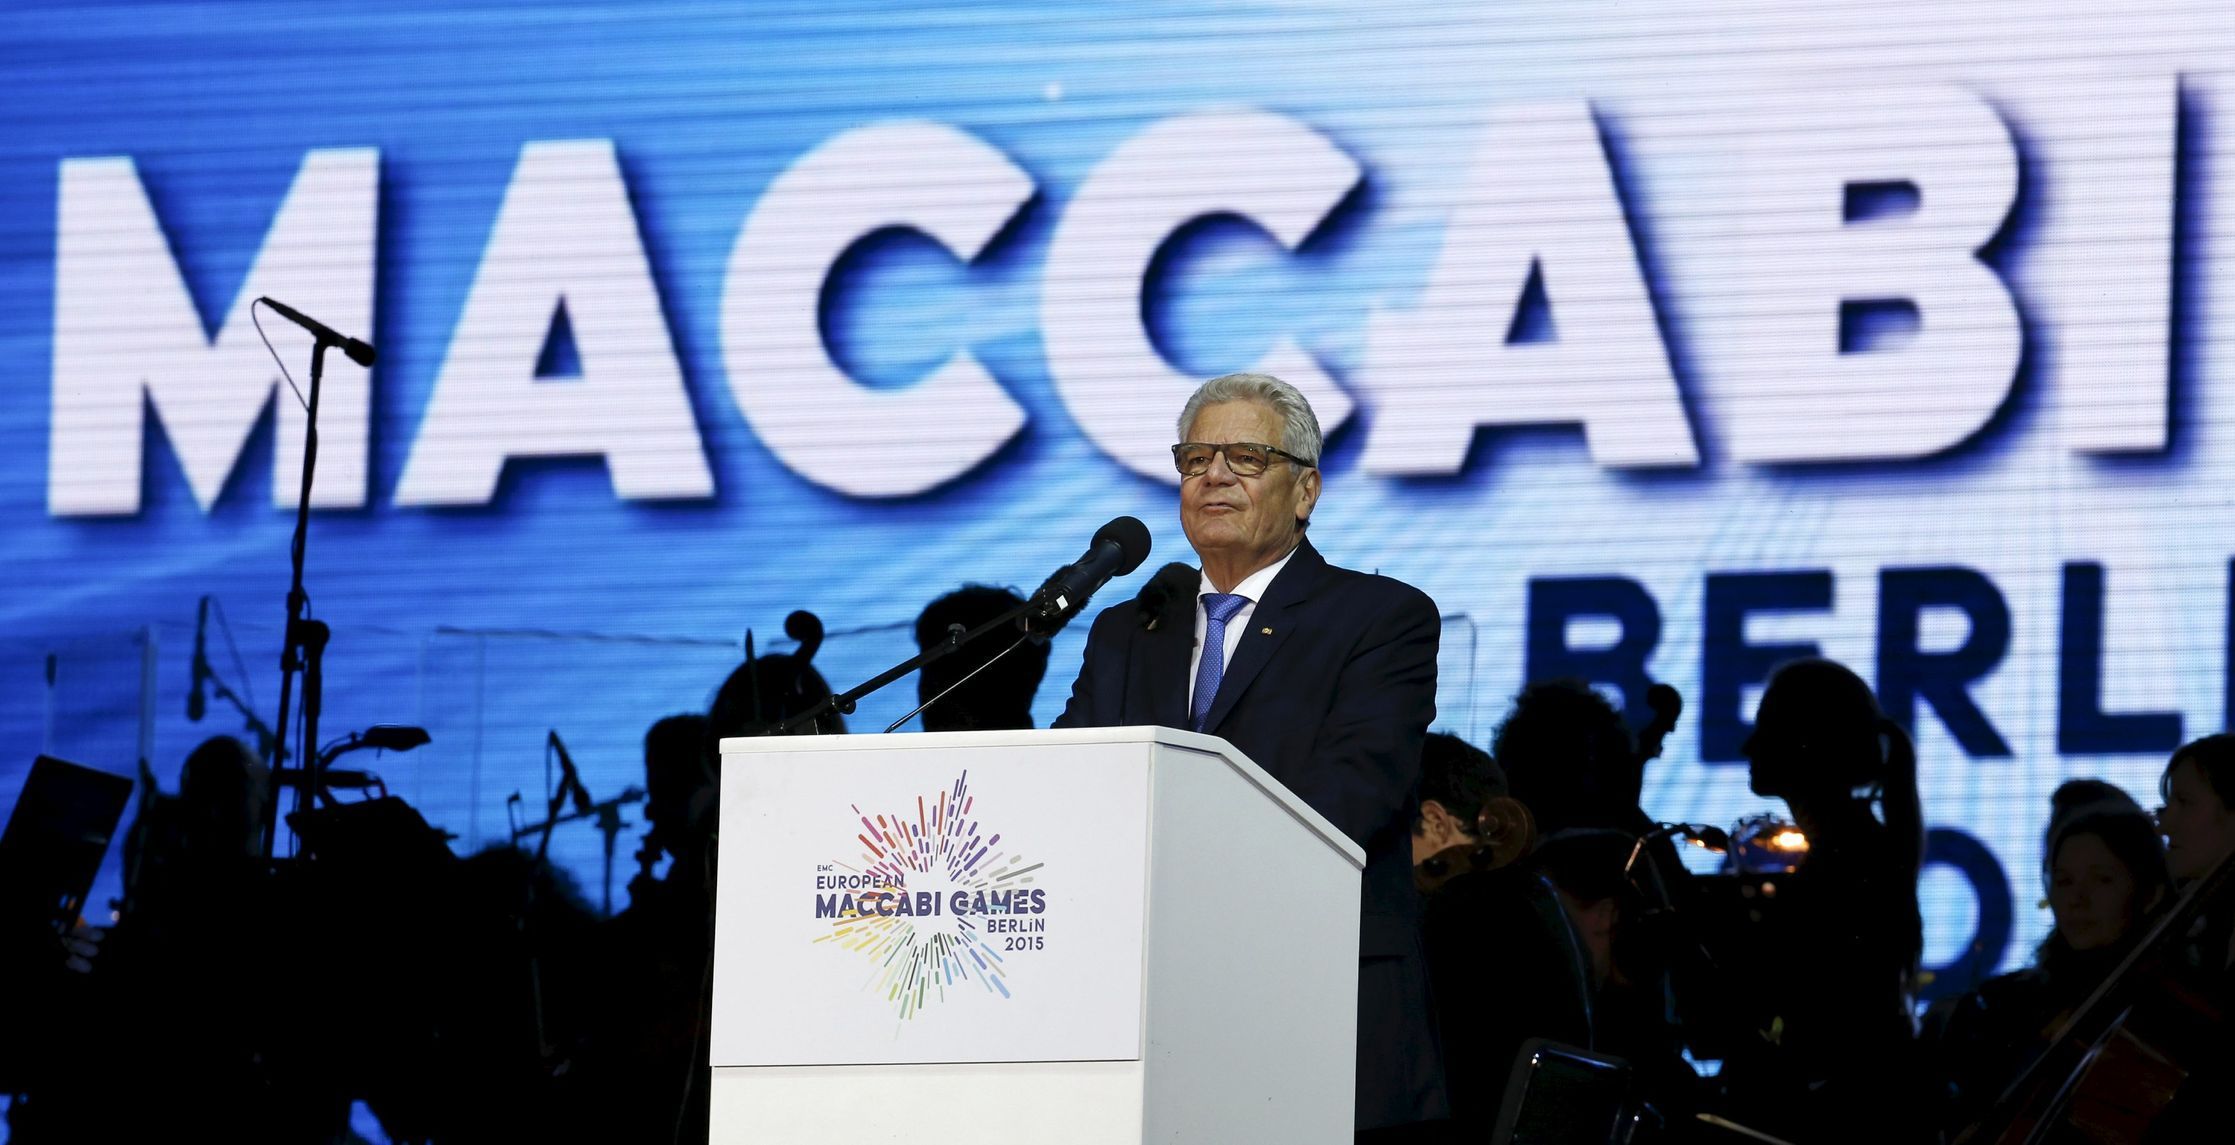 German President Joachim Gauck gives a speech for the opening ceremony of the 14th European Maccabi Games in Berlin